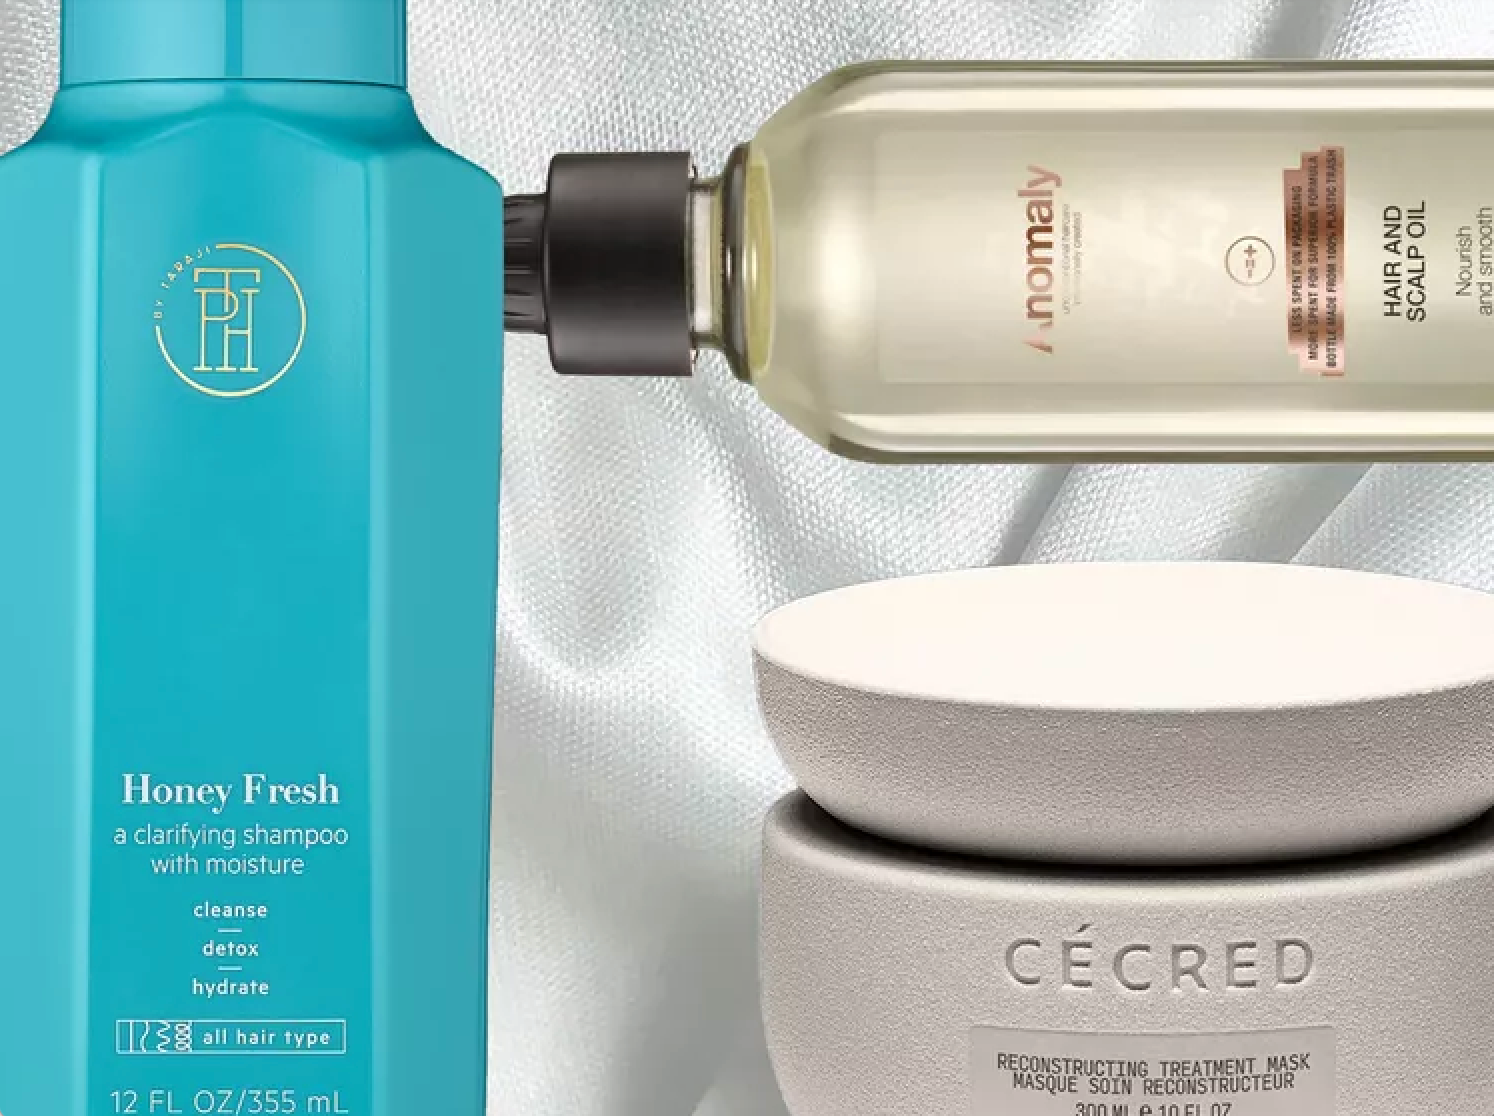 10 Celebrity Haircare Brands Worth Adding to Your Routine